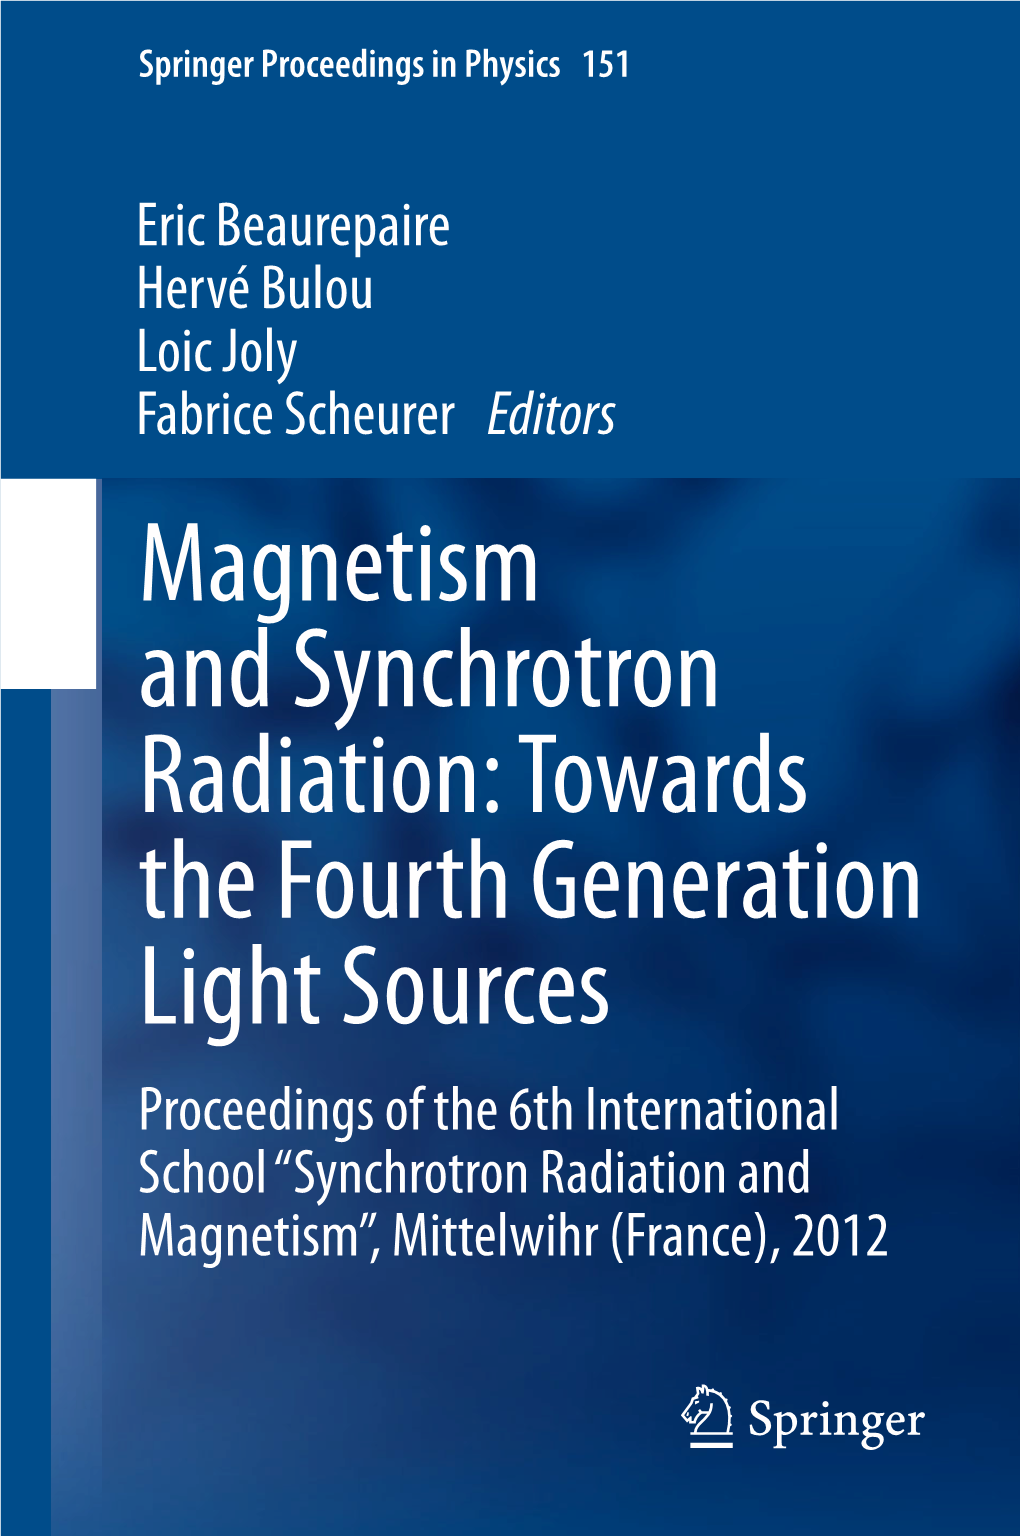 Magnetism and Synchrotron Radiation: Towards the Fourth